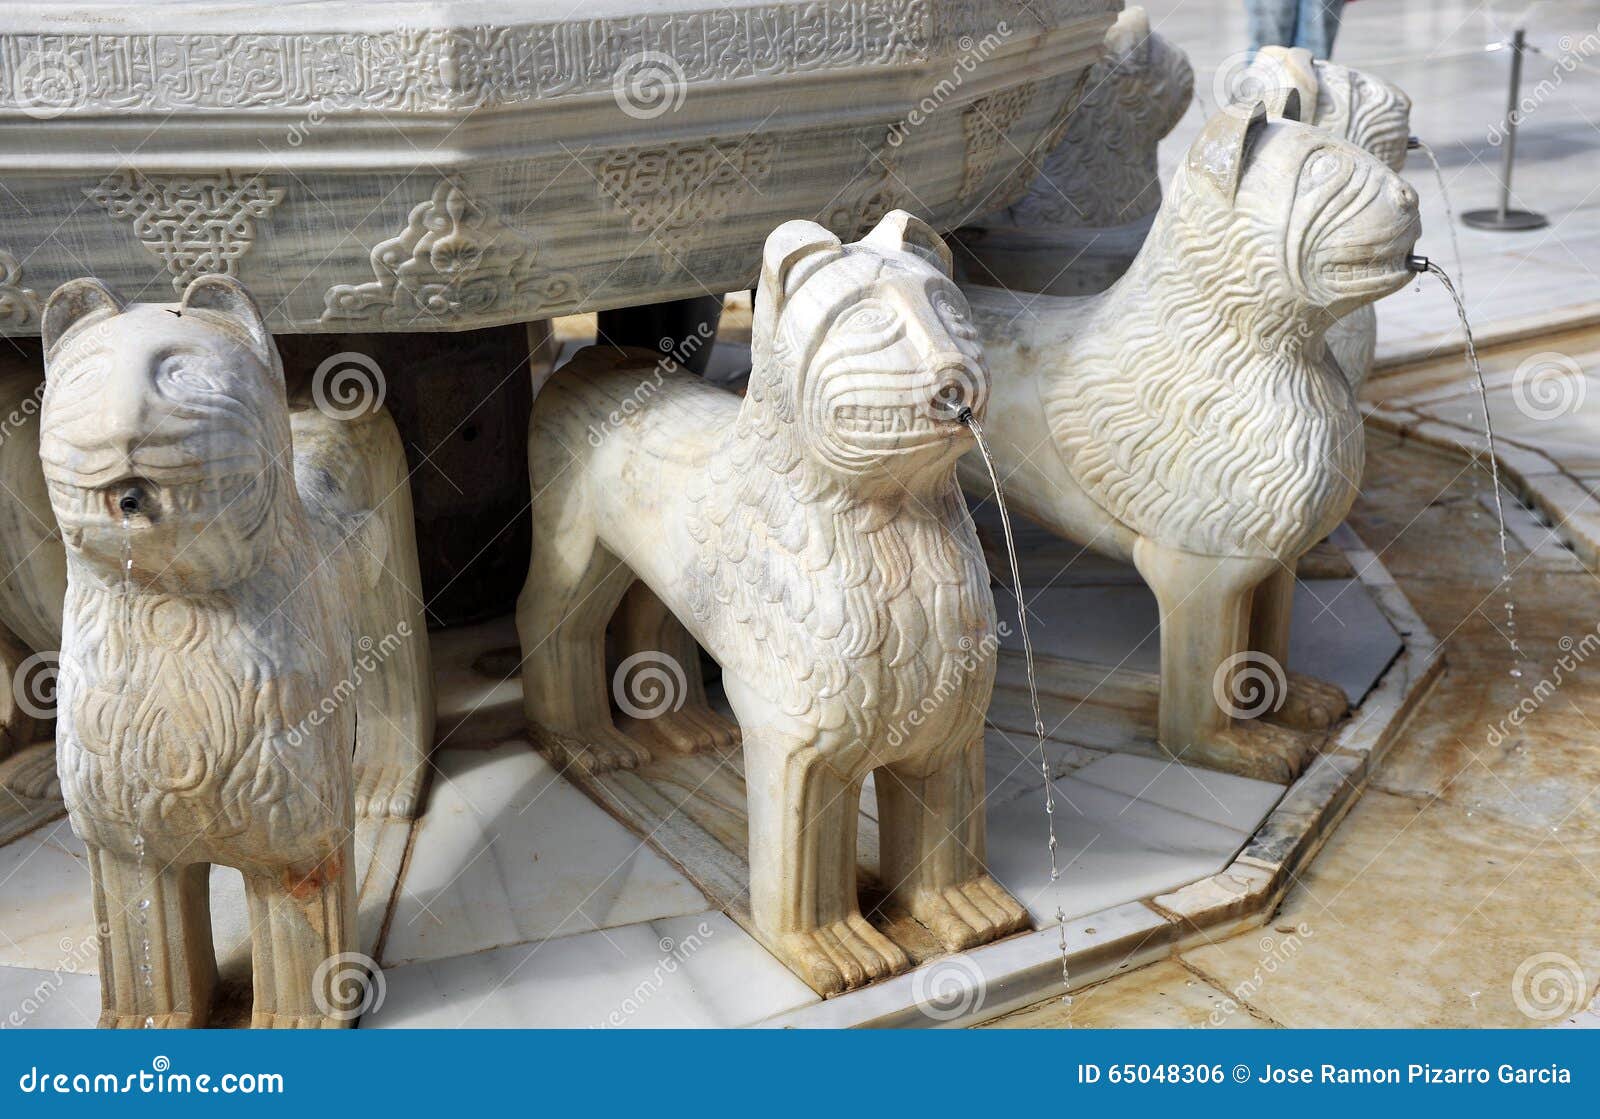 Fountain of the Lions, Alhambra Palace in Granada, Spain Stock Photo -  Image of arcs, filigree: 65048306